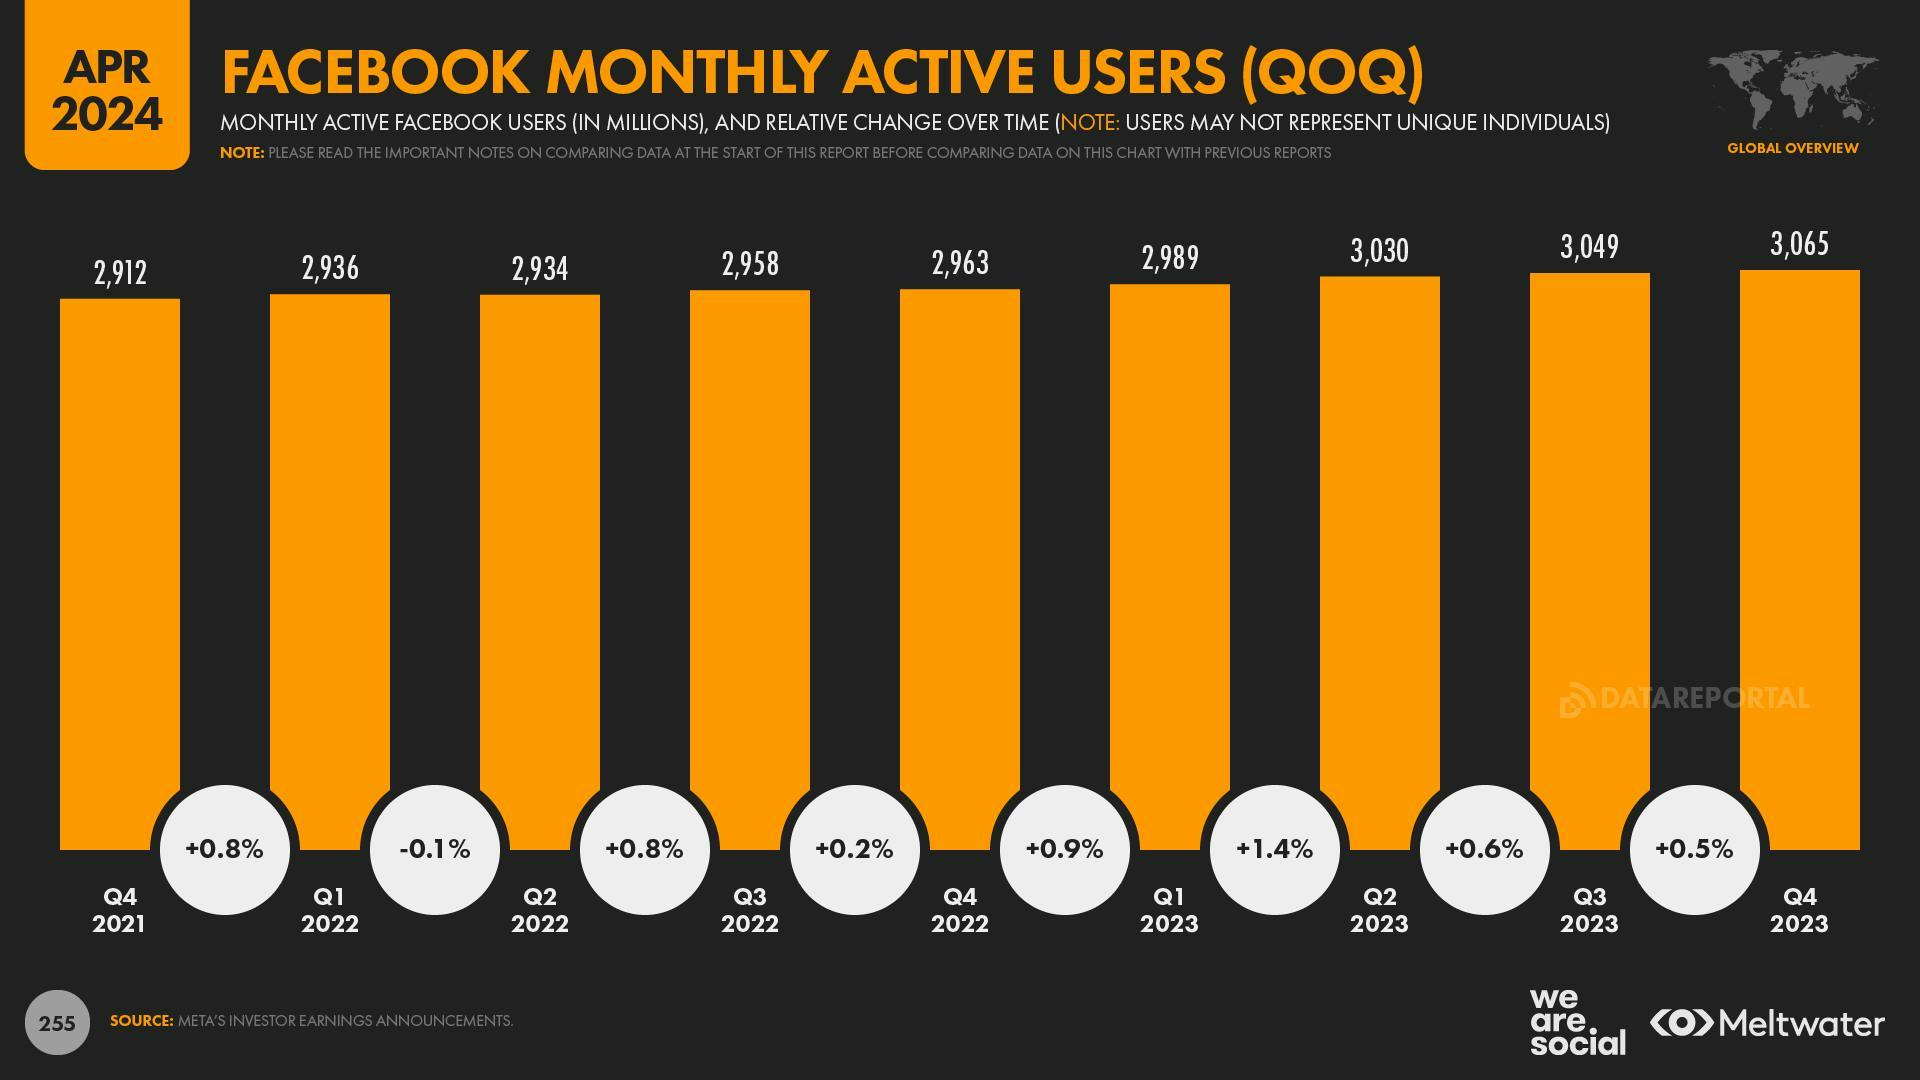 Facebook monthly active users (QOQ)